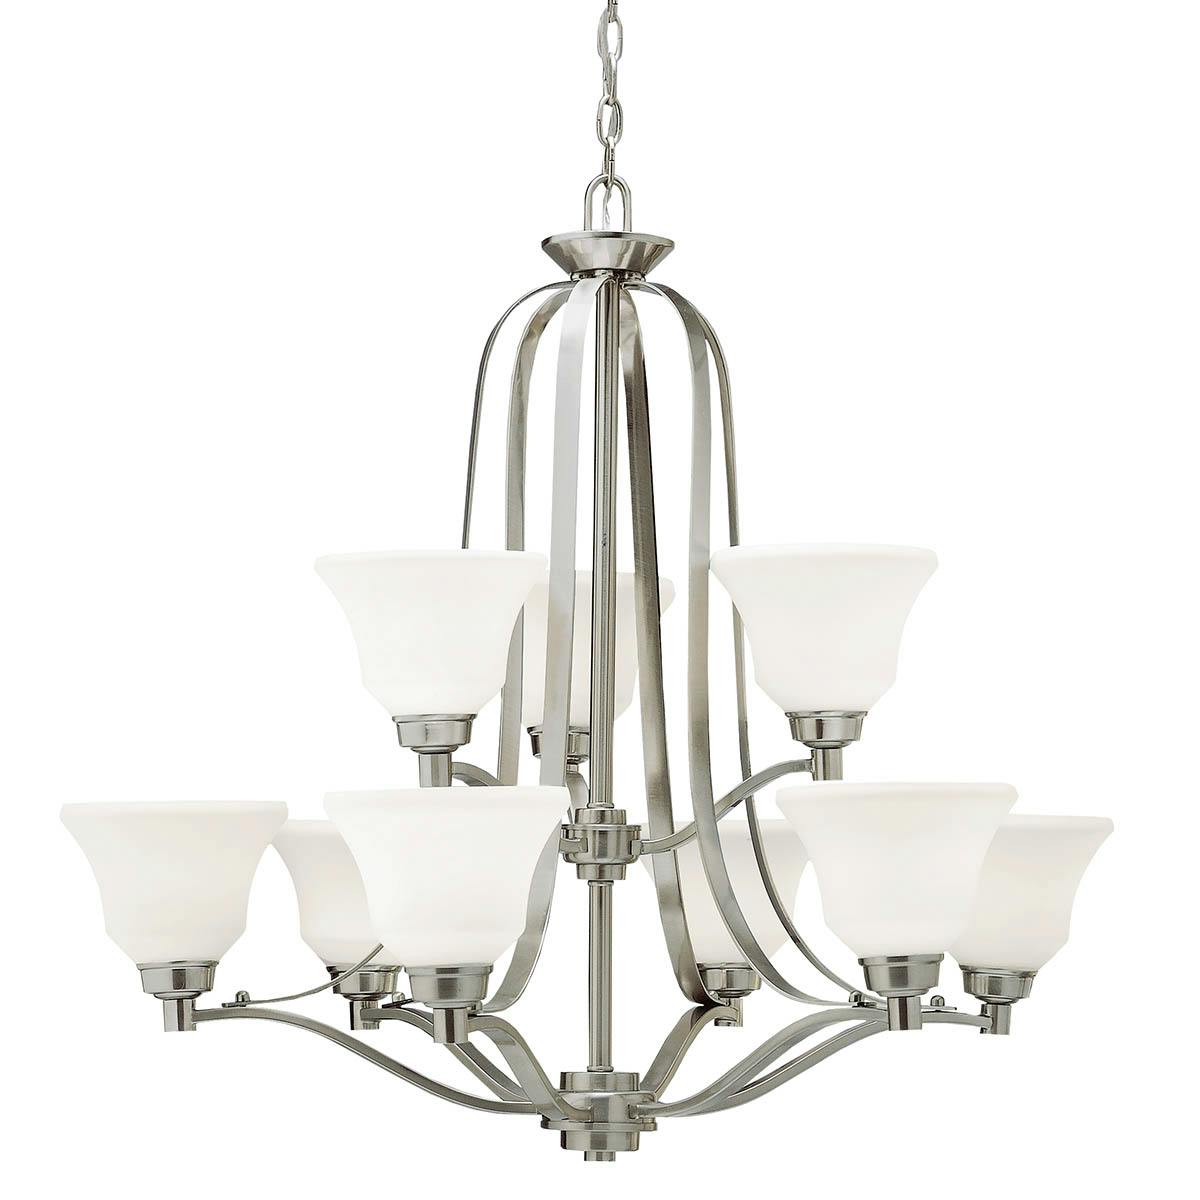 Langford 30.5" 2 Tier Chandelier Nickel on a white background